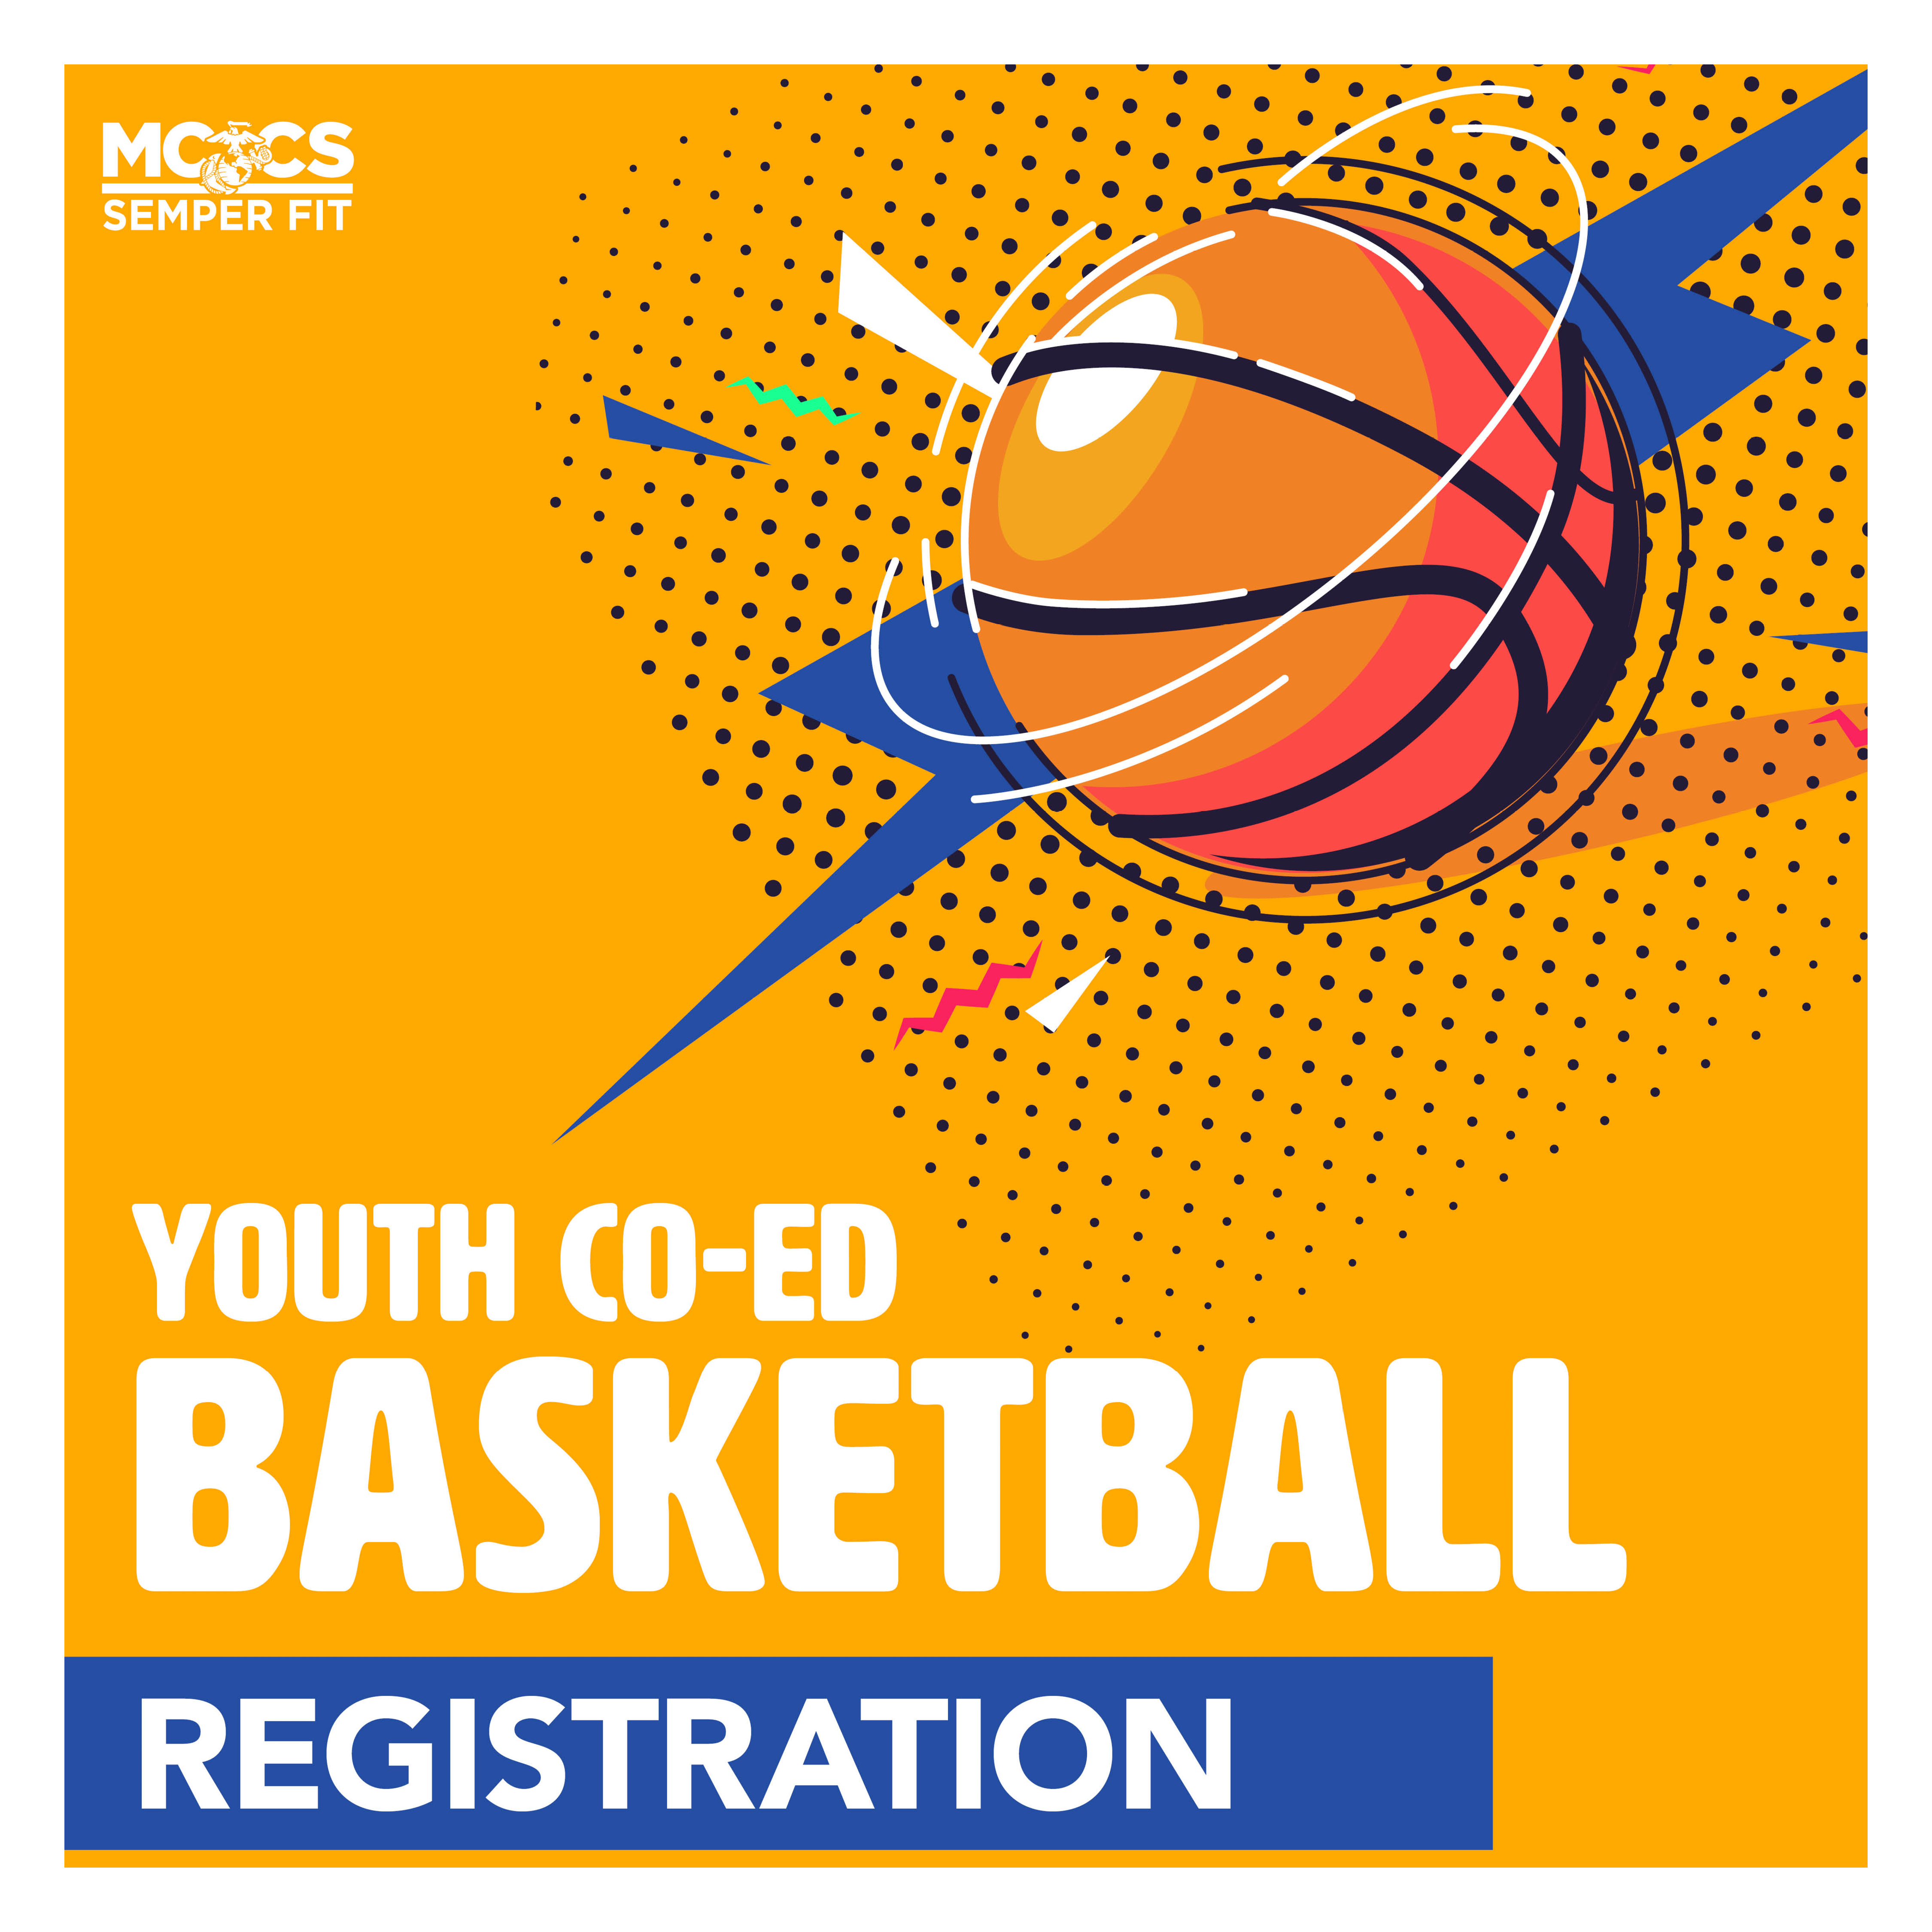 Youth Co-ed Basketball Registration